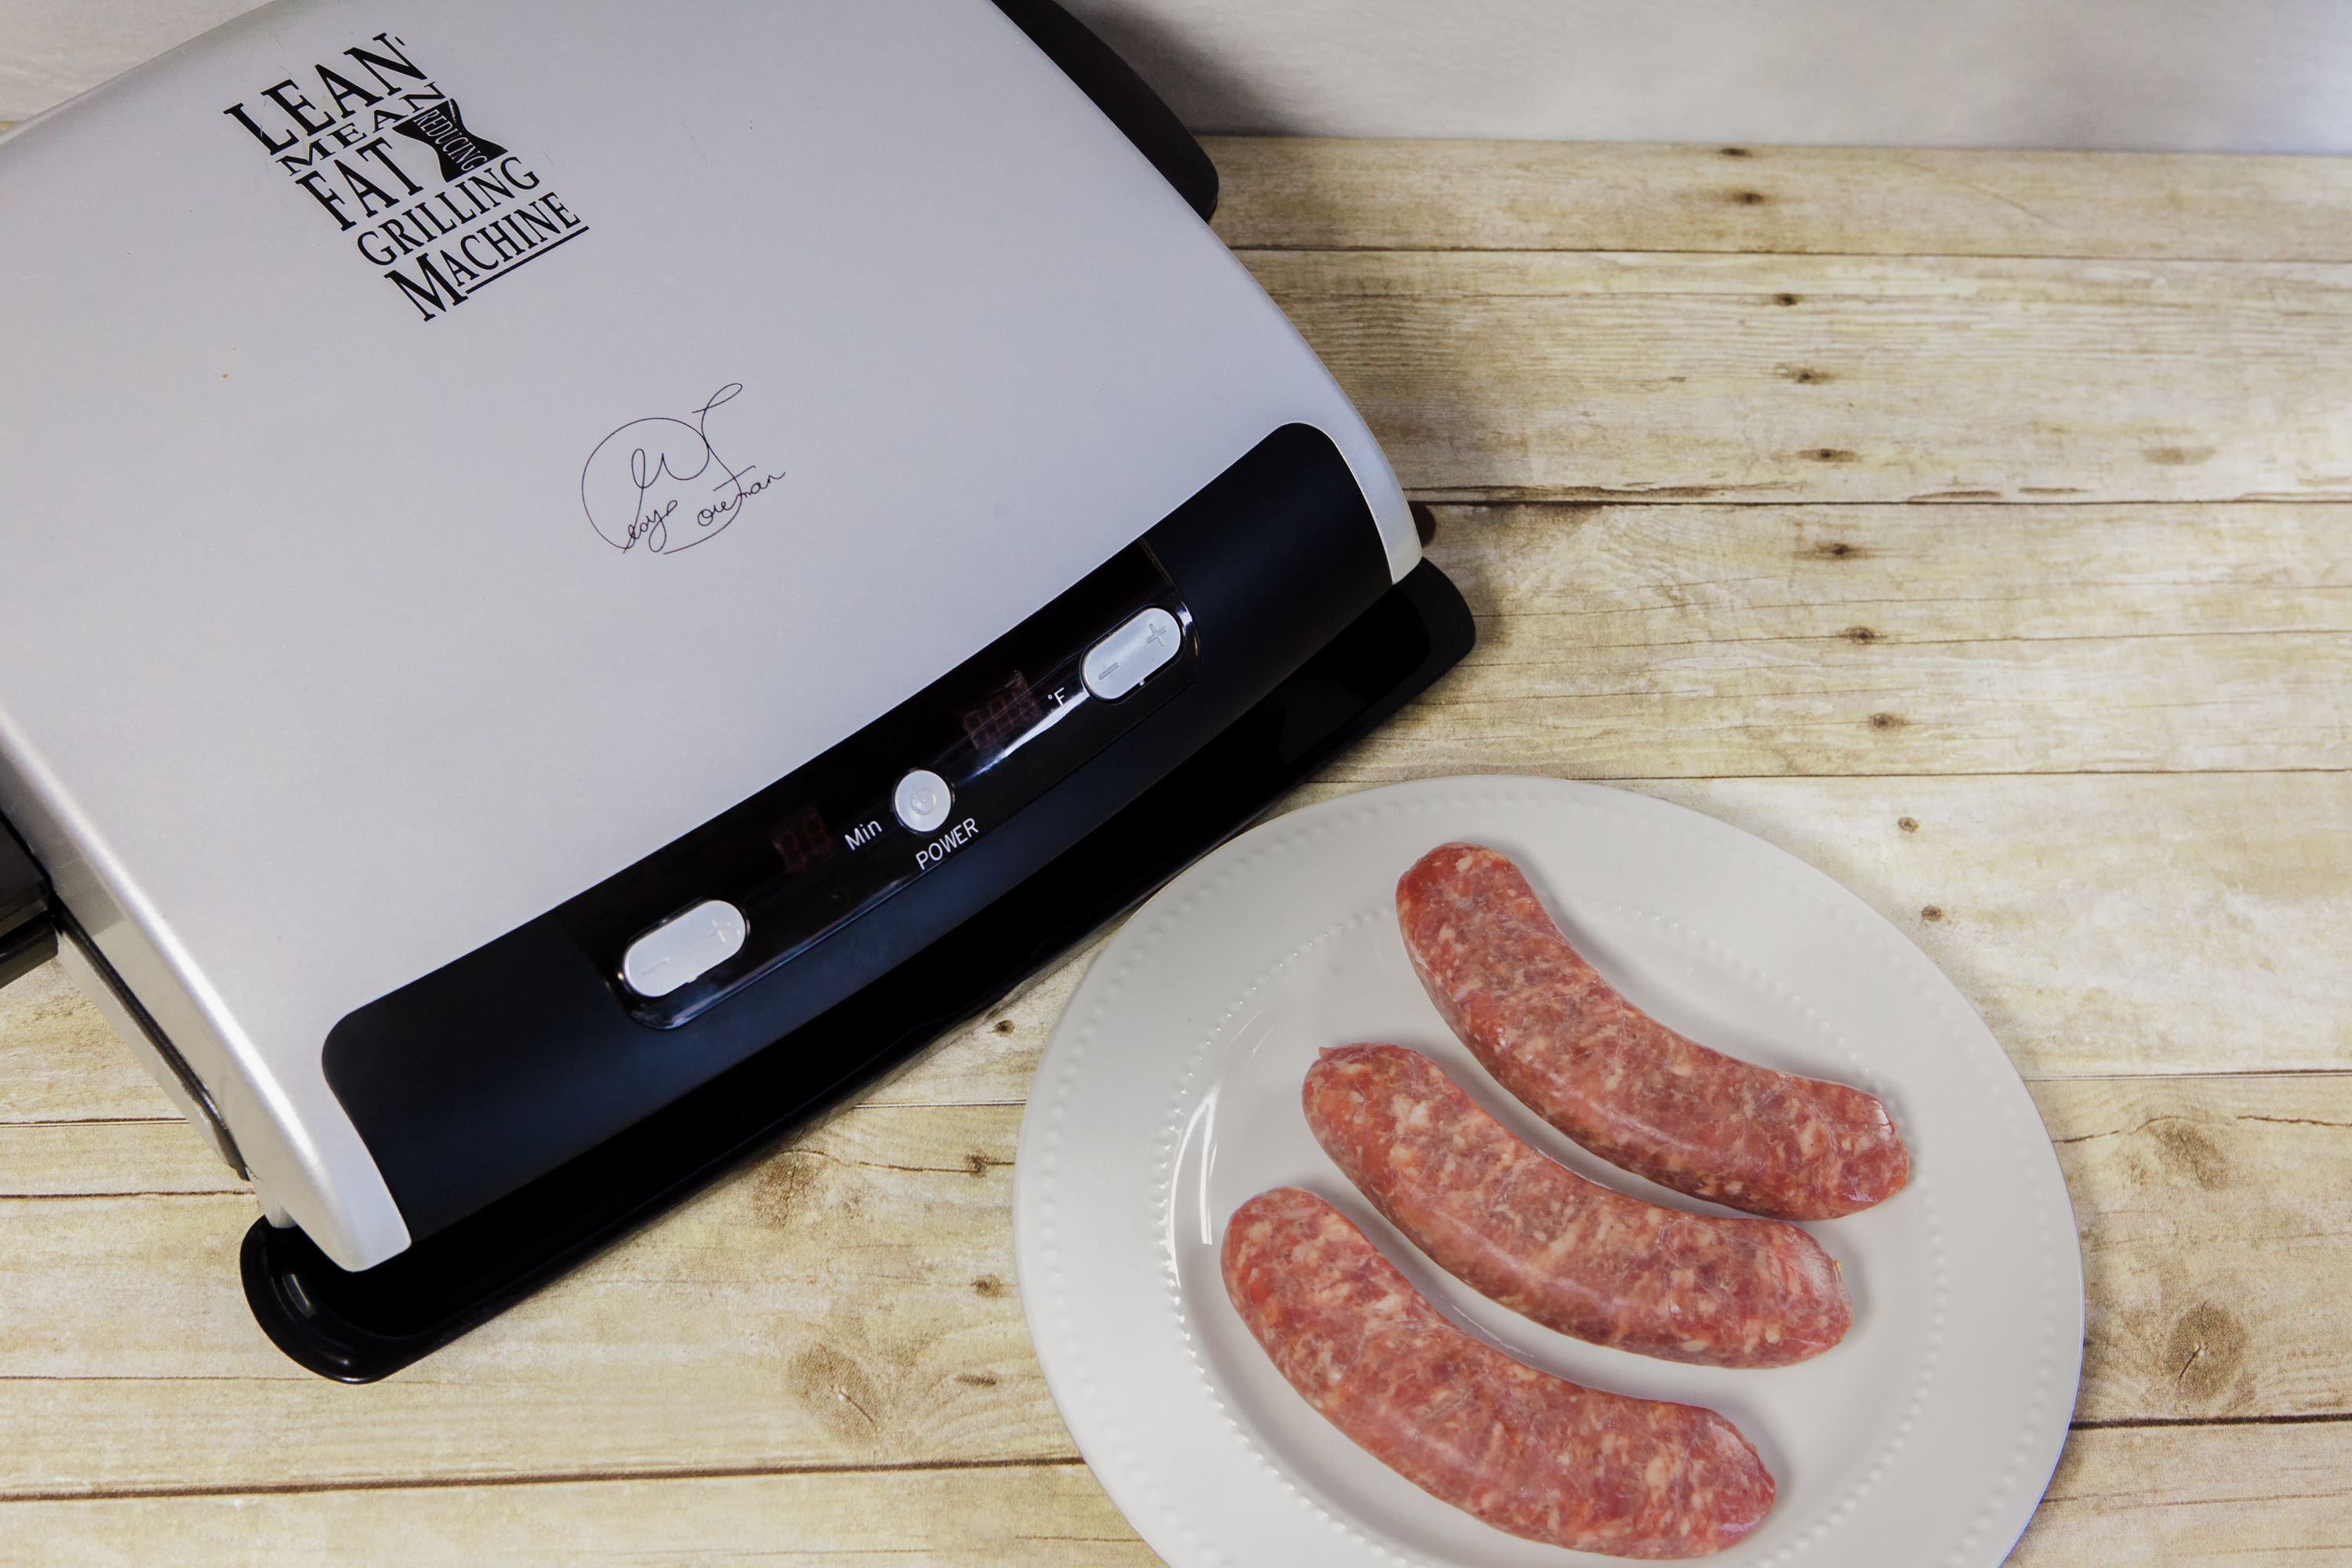 George Foreman Grill Cooking Times Bratwurst Sausage